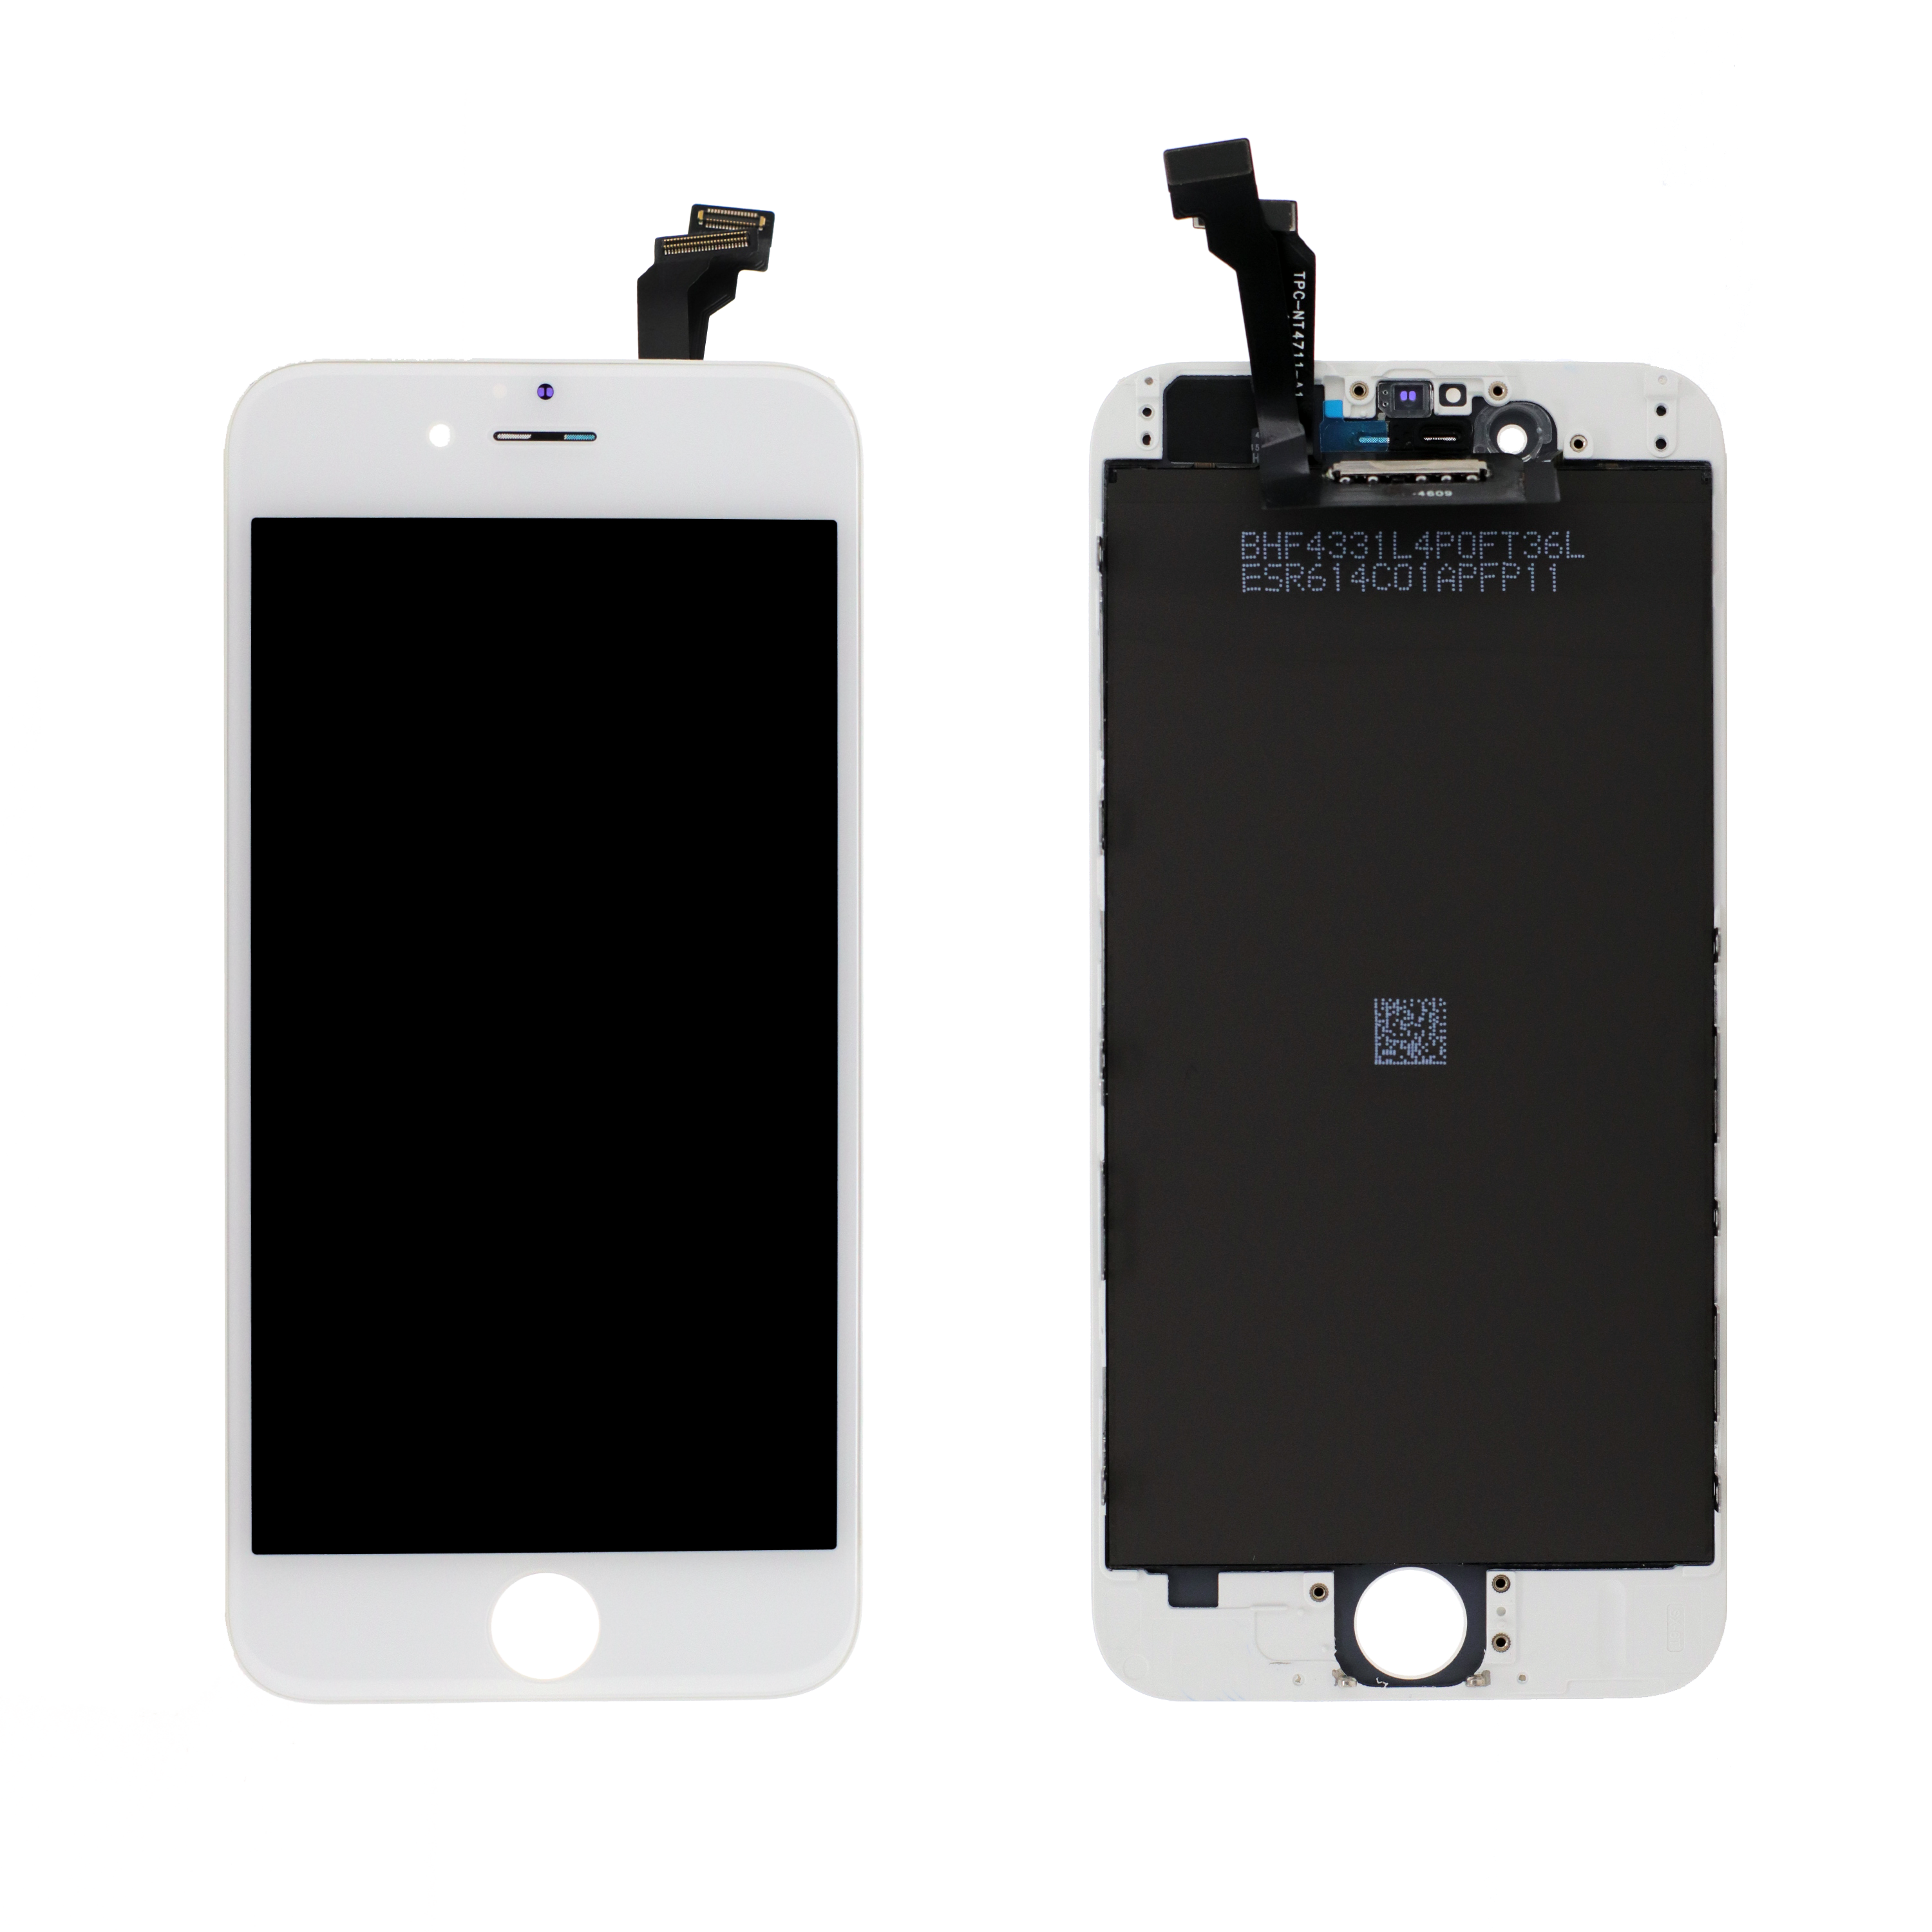 Premium LCD Assembly for use with iPhone 6 (White)